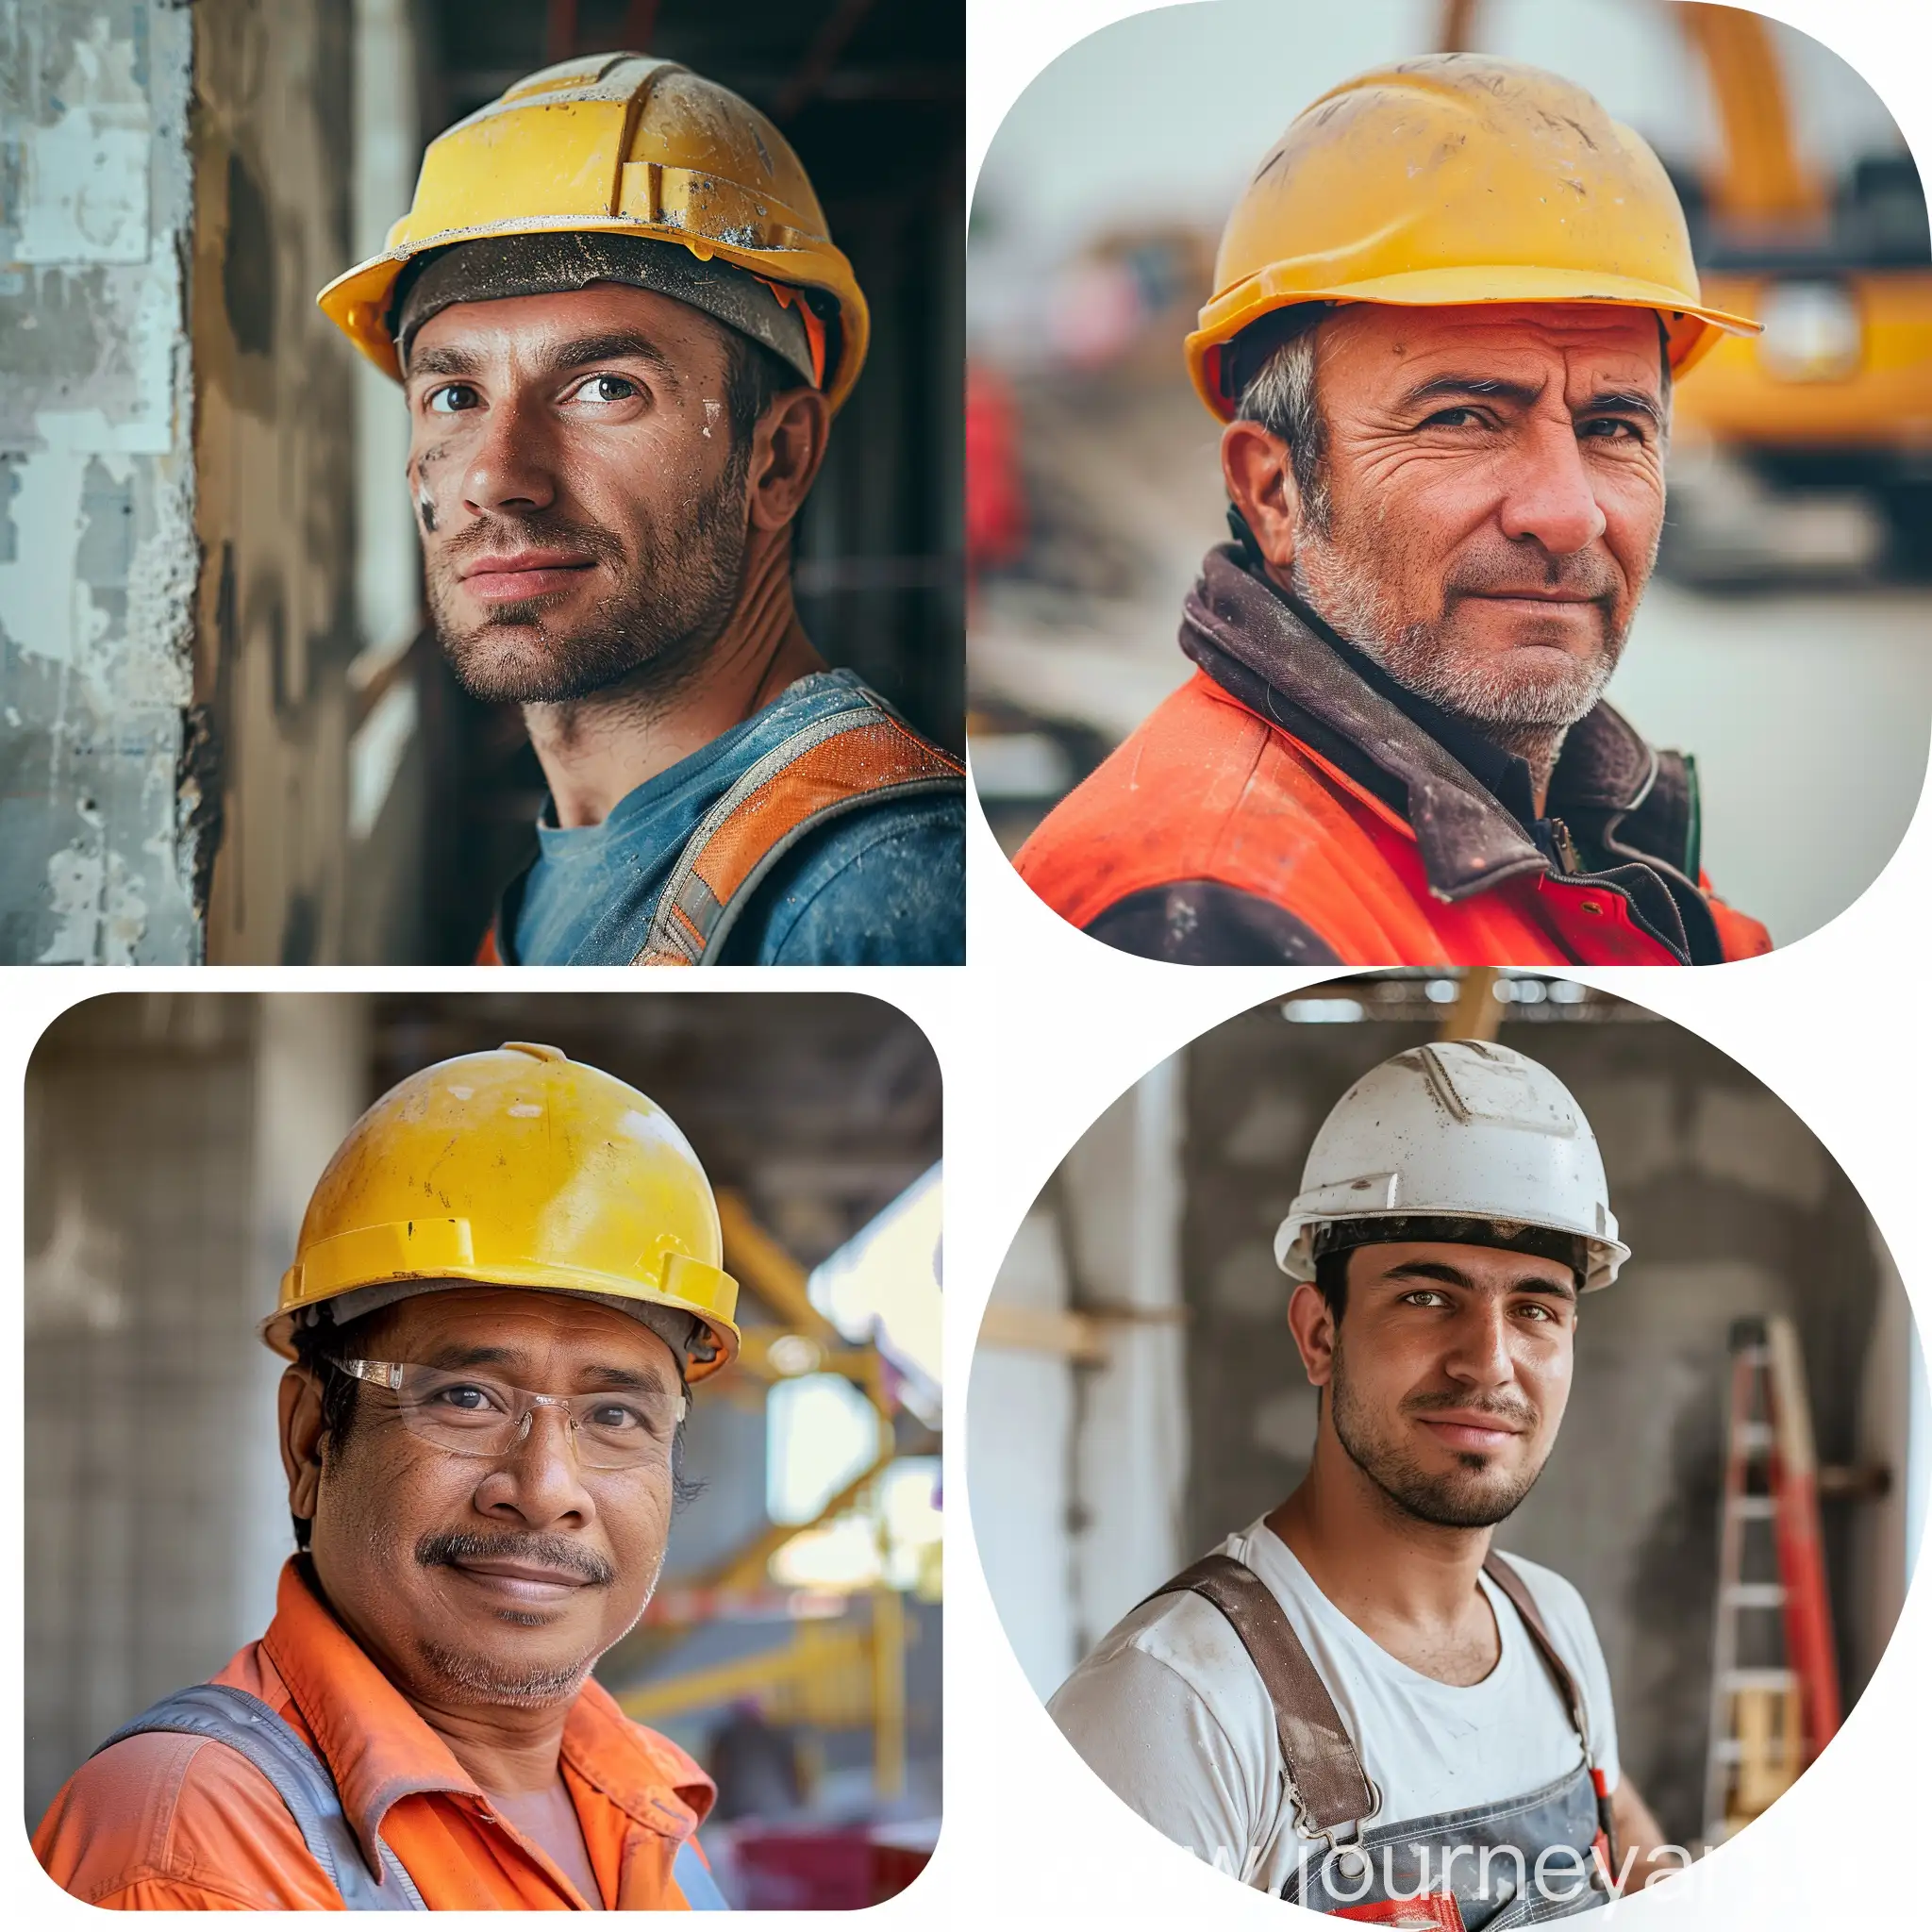 Professional-Construction-Worker-in-Square-Portrait